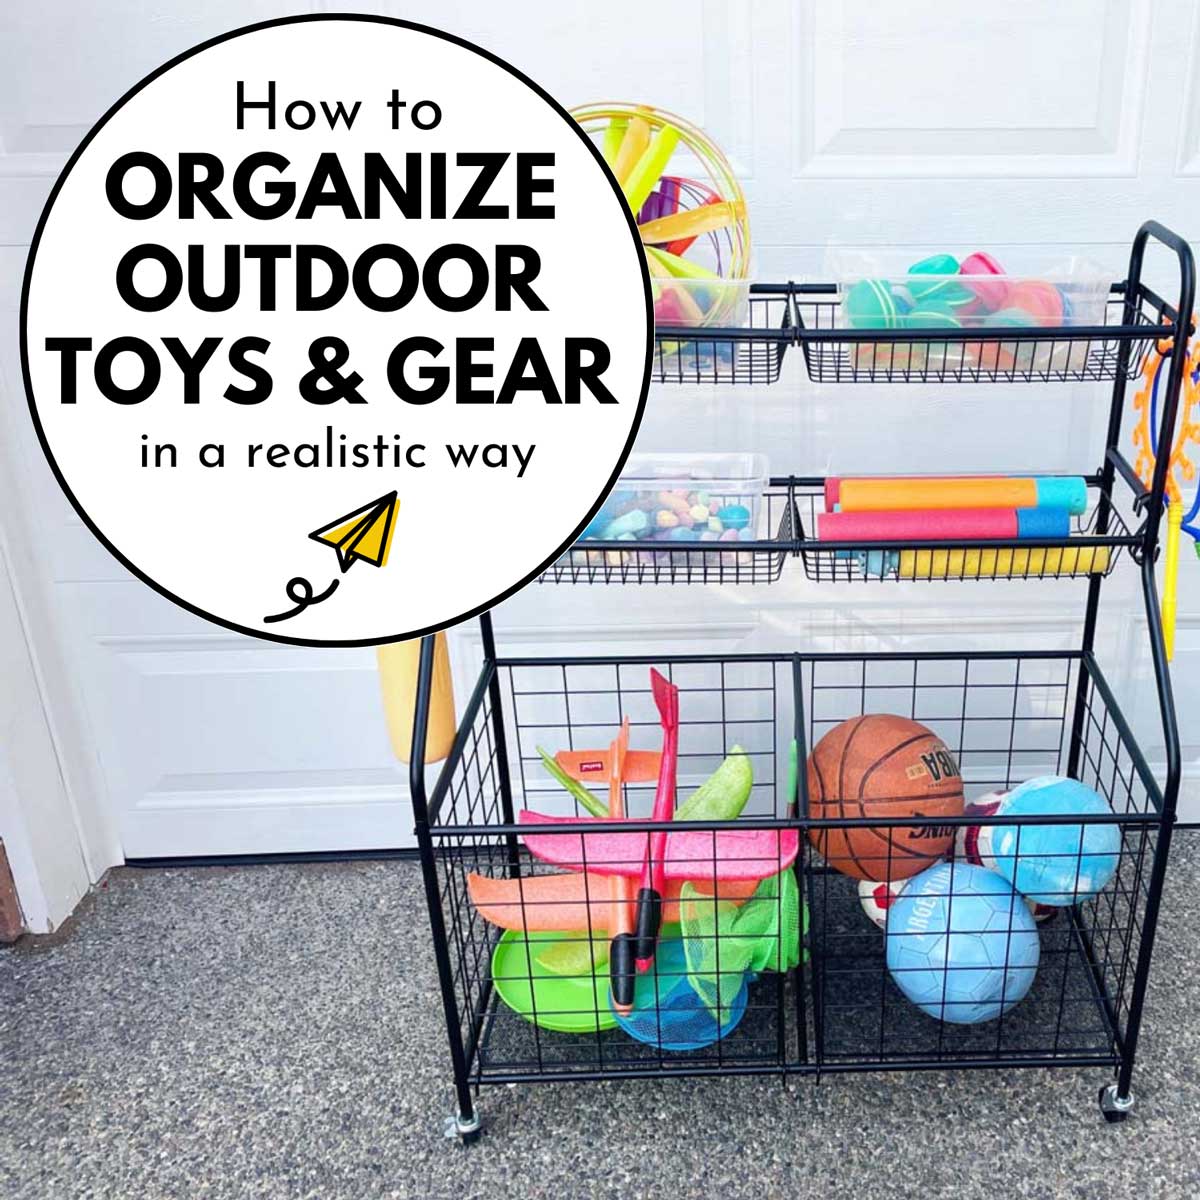 How to organize outdoor toys and gear in a realistic way: image shows a rolling cart of outdoor toys.